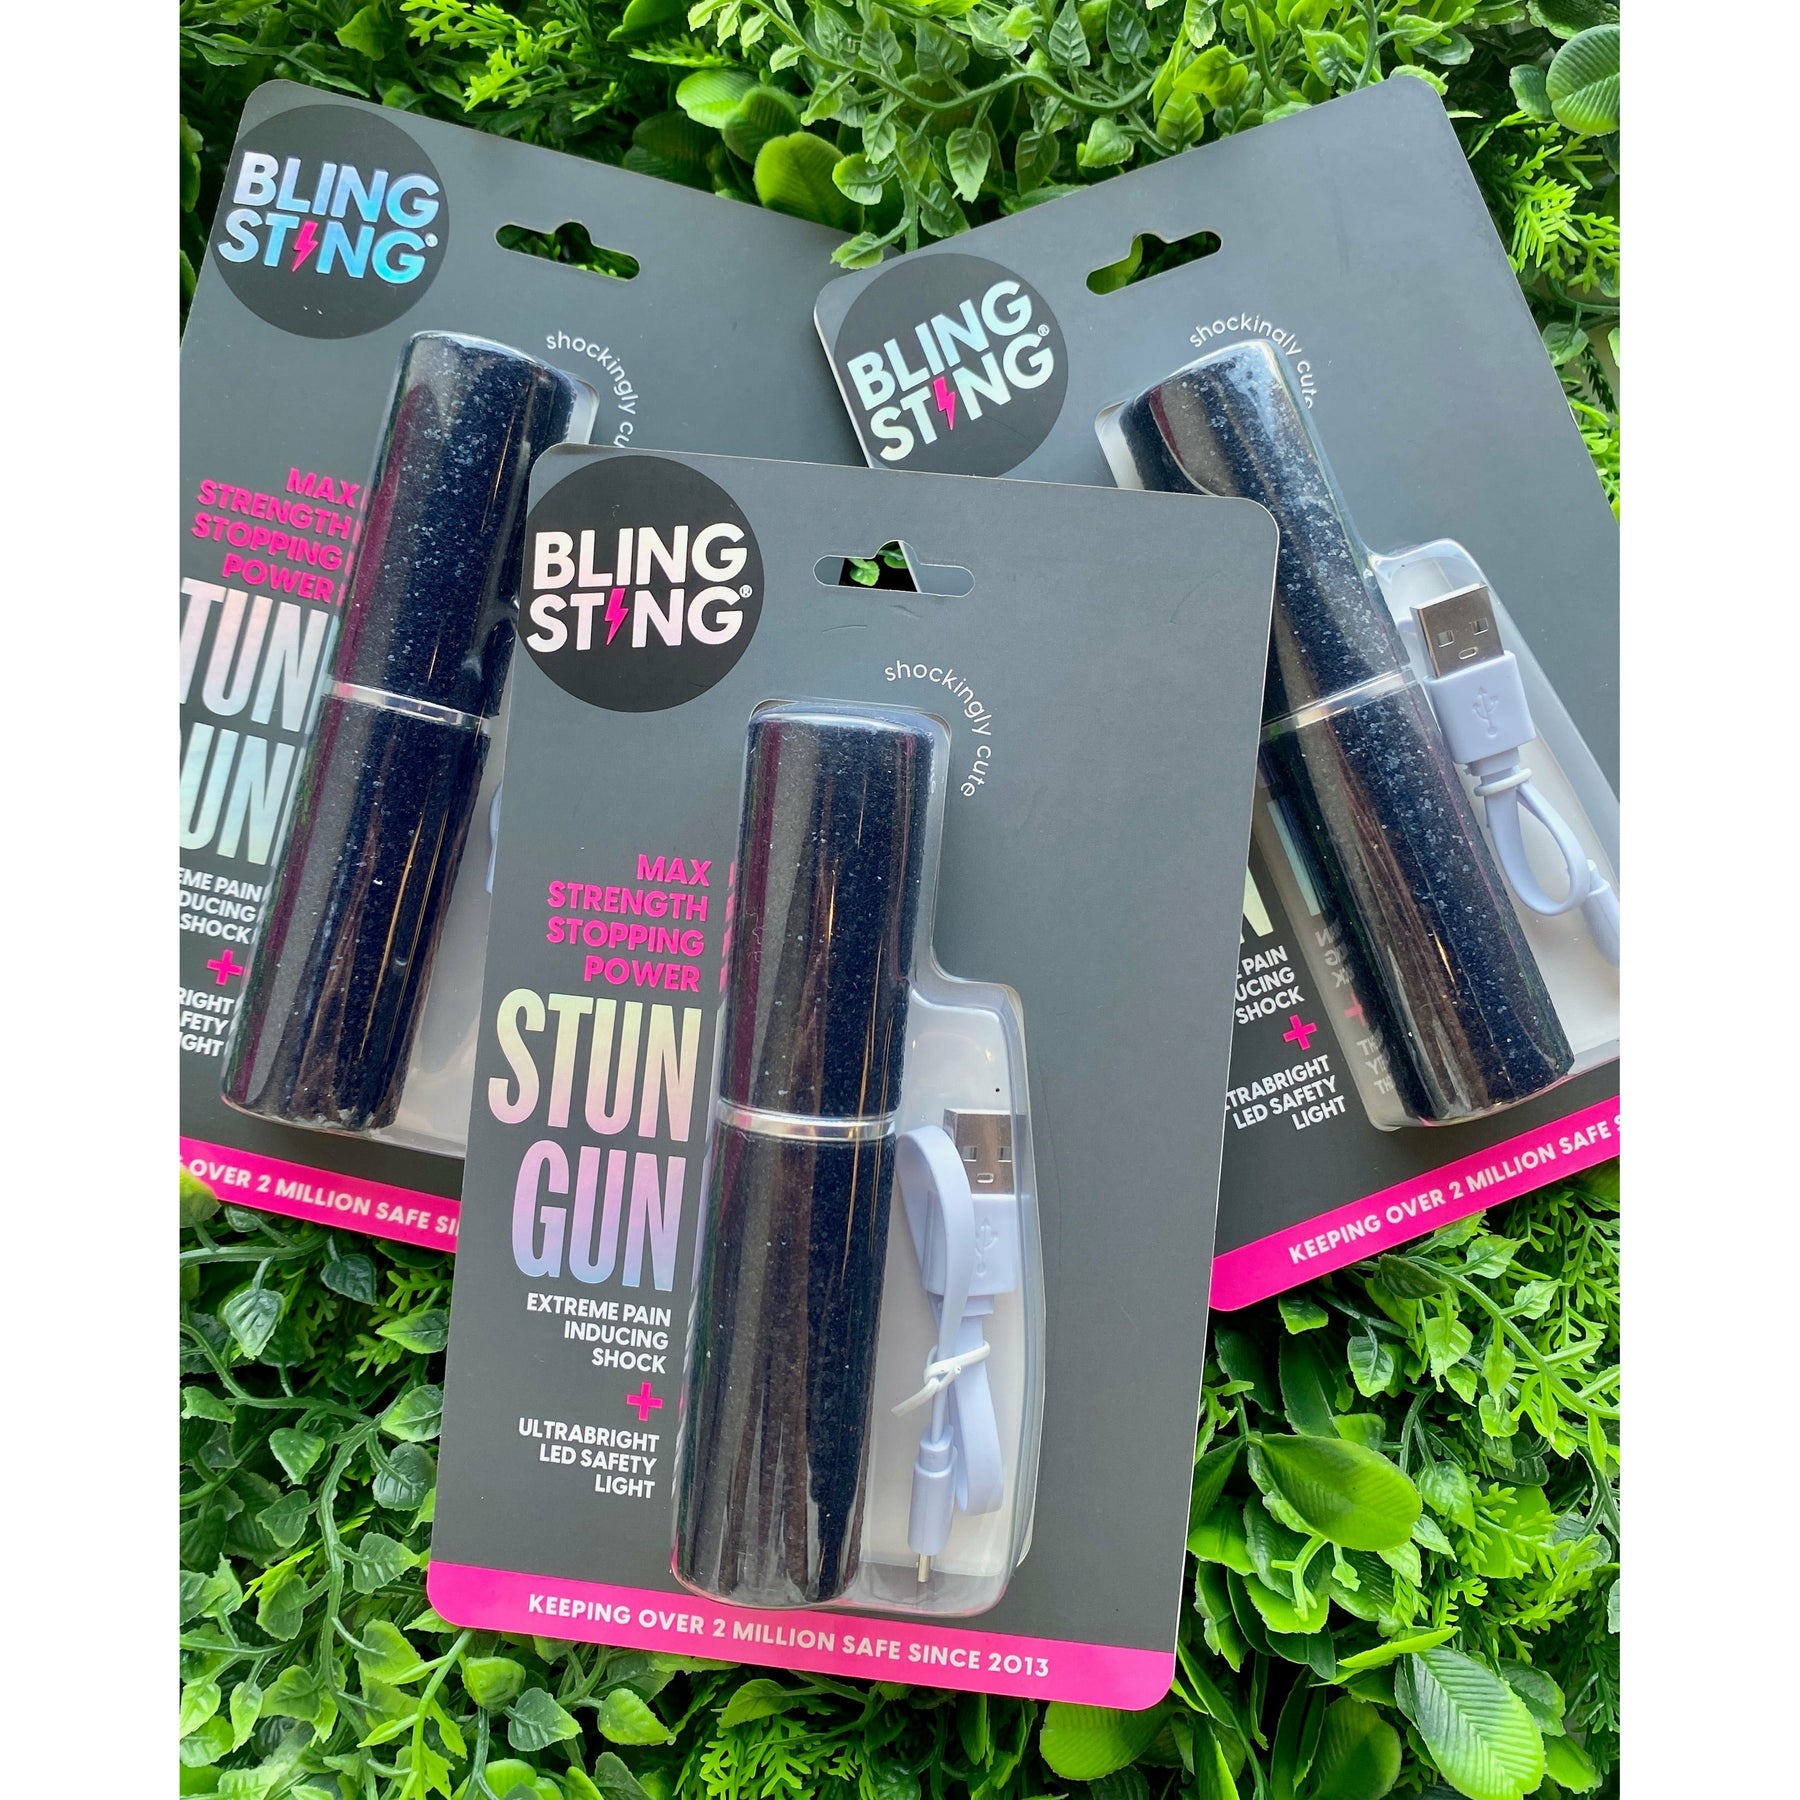 How To Effectively Use Your BLINGSTING Mini Stun Gun As A